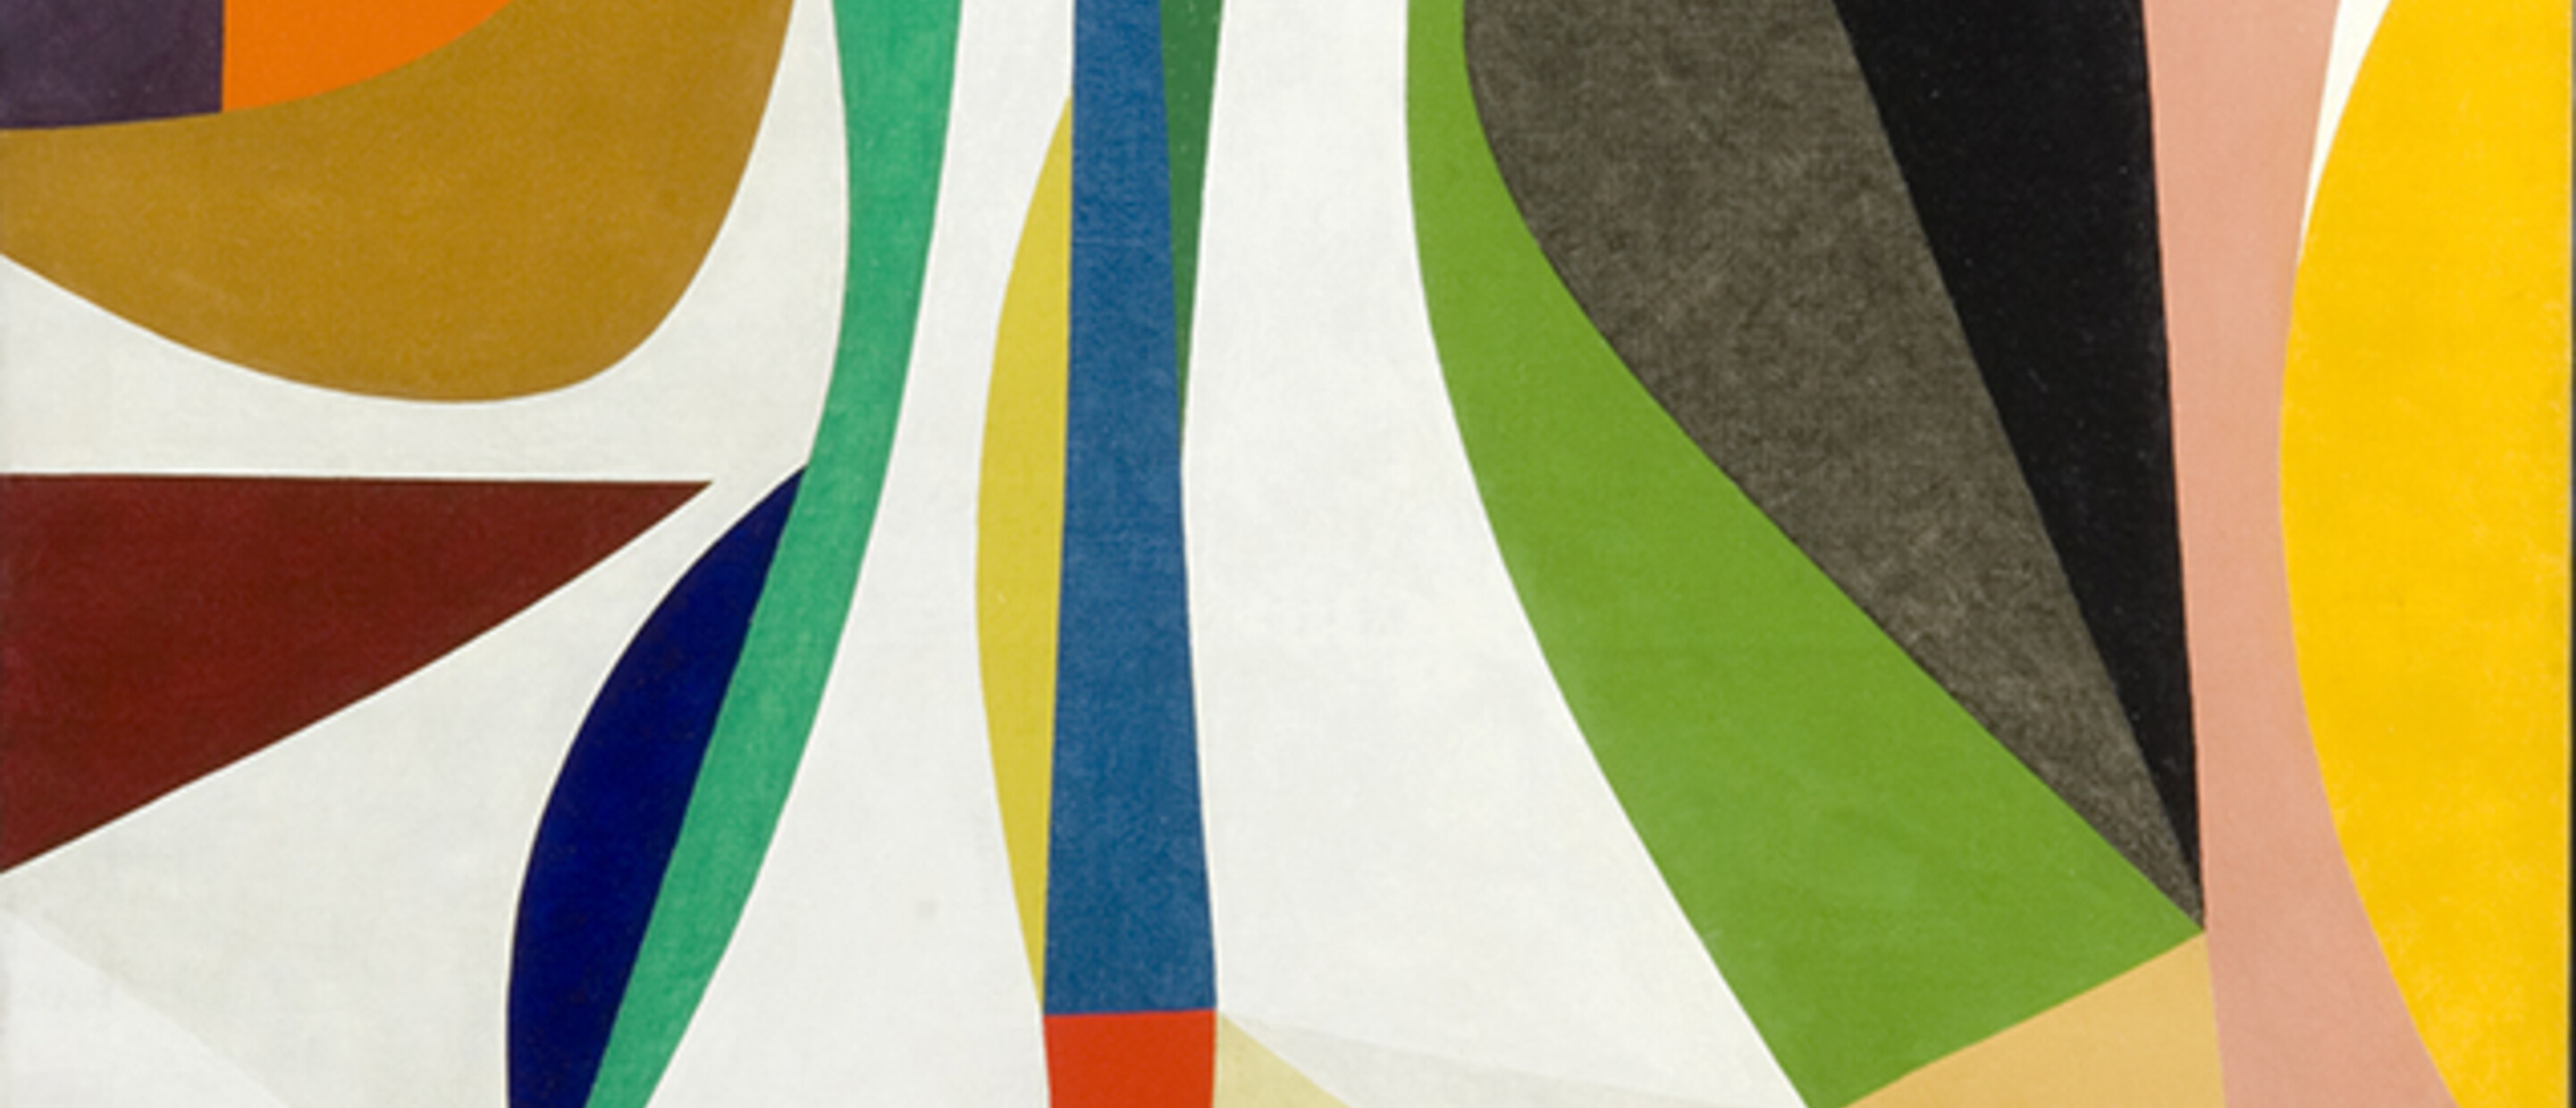 Frederick Hammersley, Up With In, 1957-8, Painting, 48 x 36 in. Pomona College Collection. Museum purchase with funds provided by the Estate of Walter and Elise Mosher